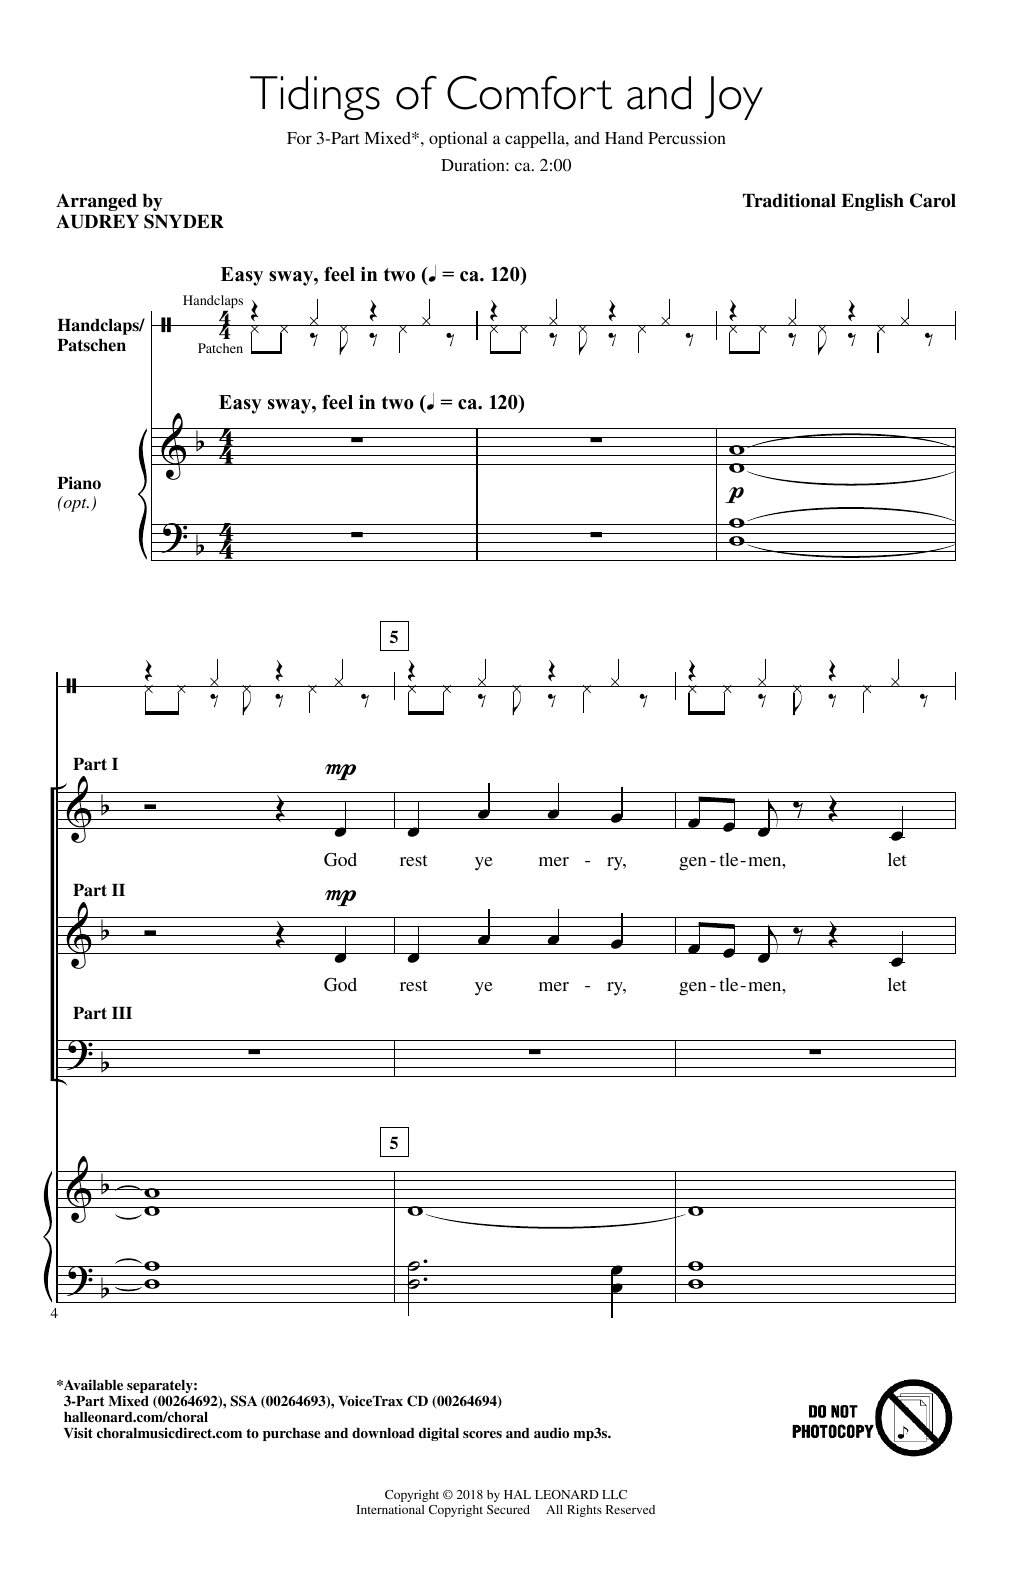 Download Audrey Snyder Tidings Of Comfort And Joy Sheet Music